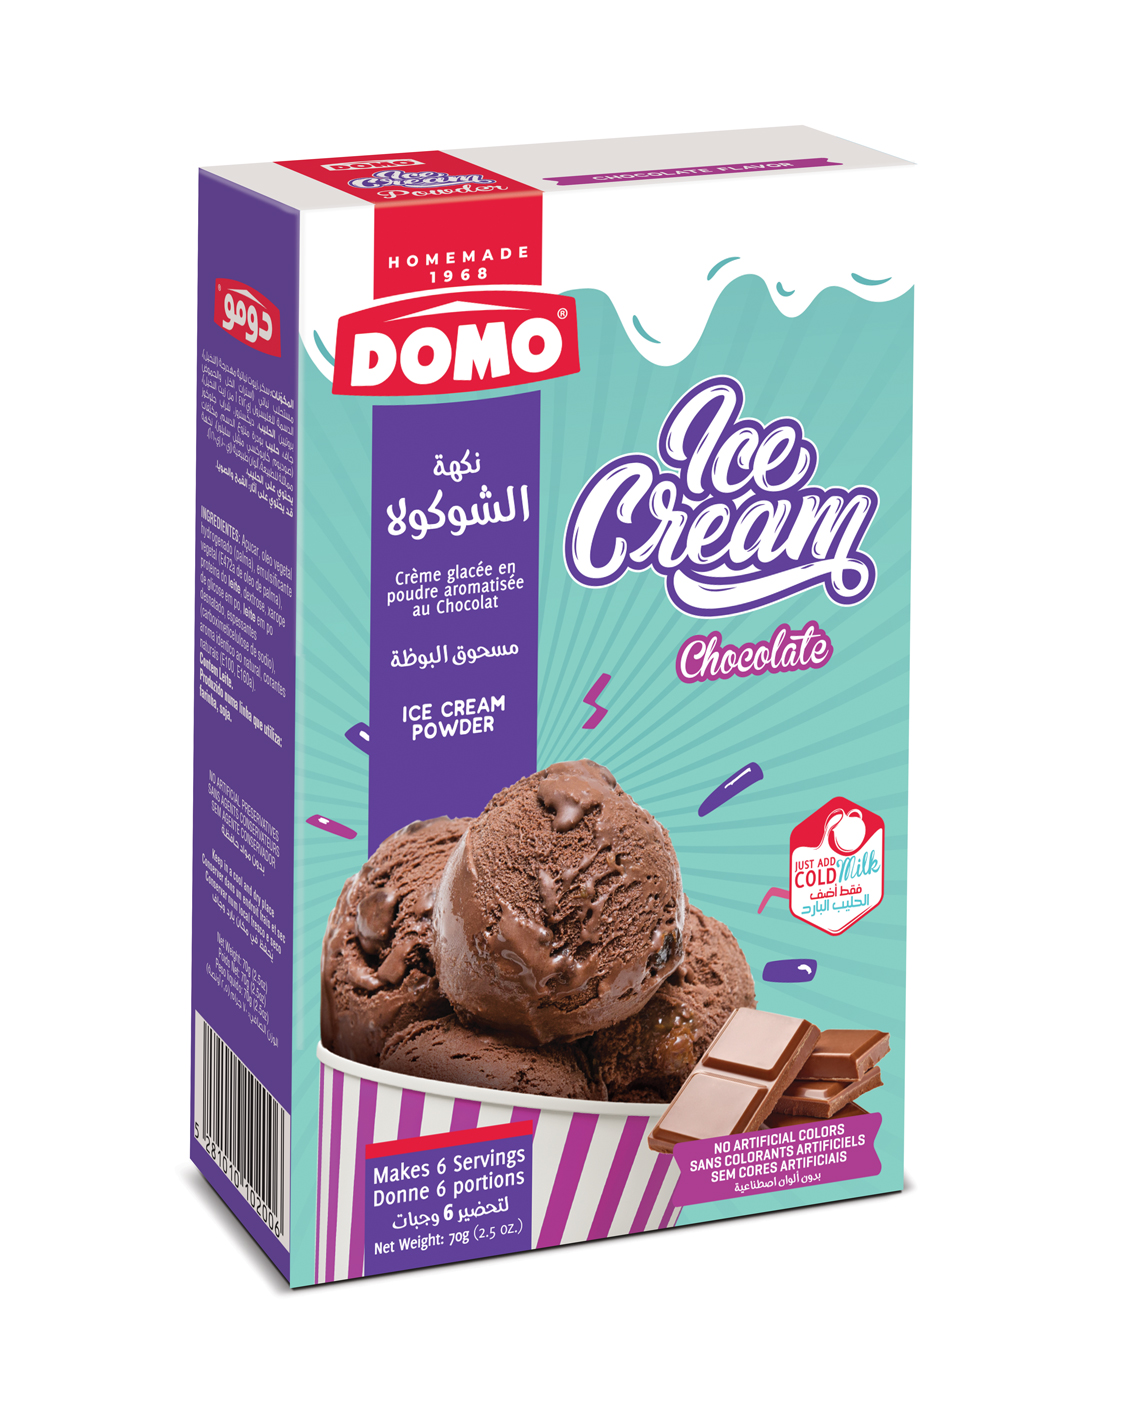 Domo is a leader brand in homemade desserts across Lebanon and Arab Pan